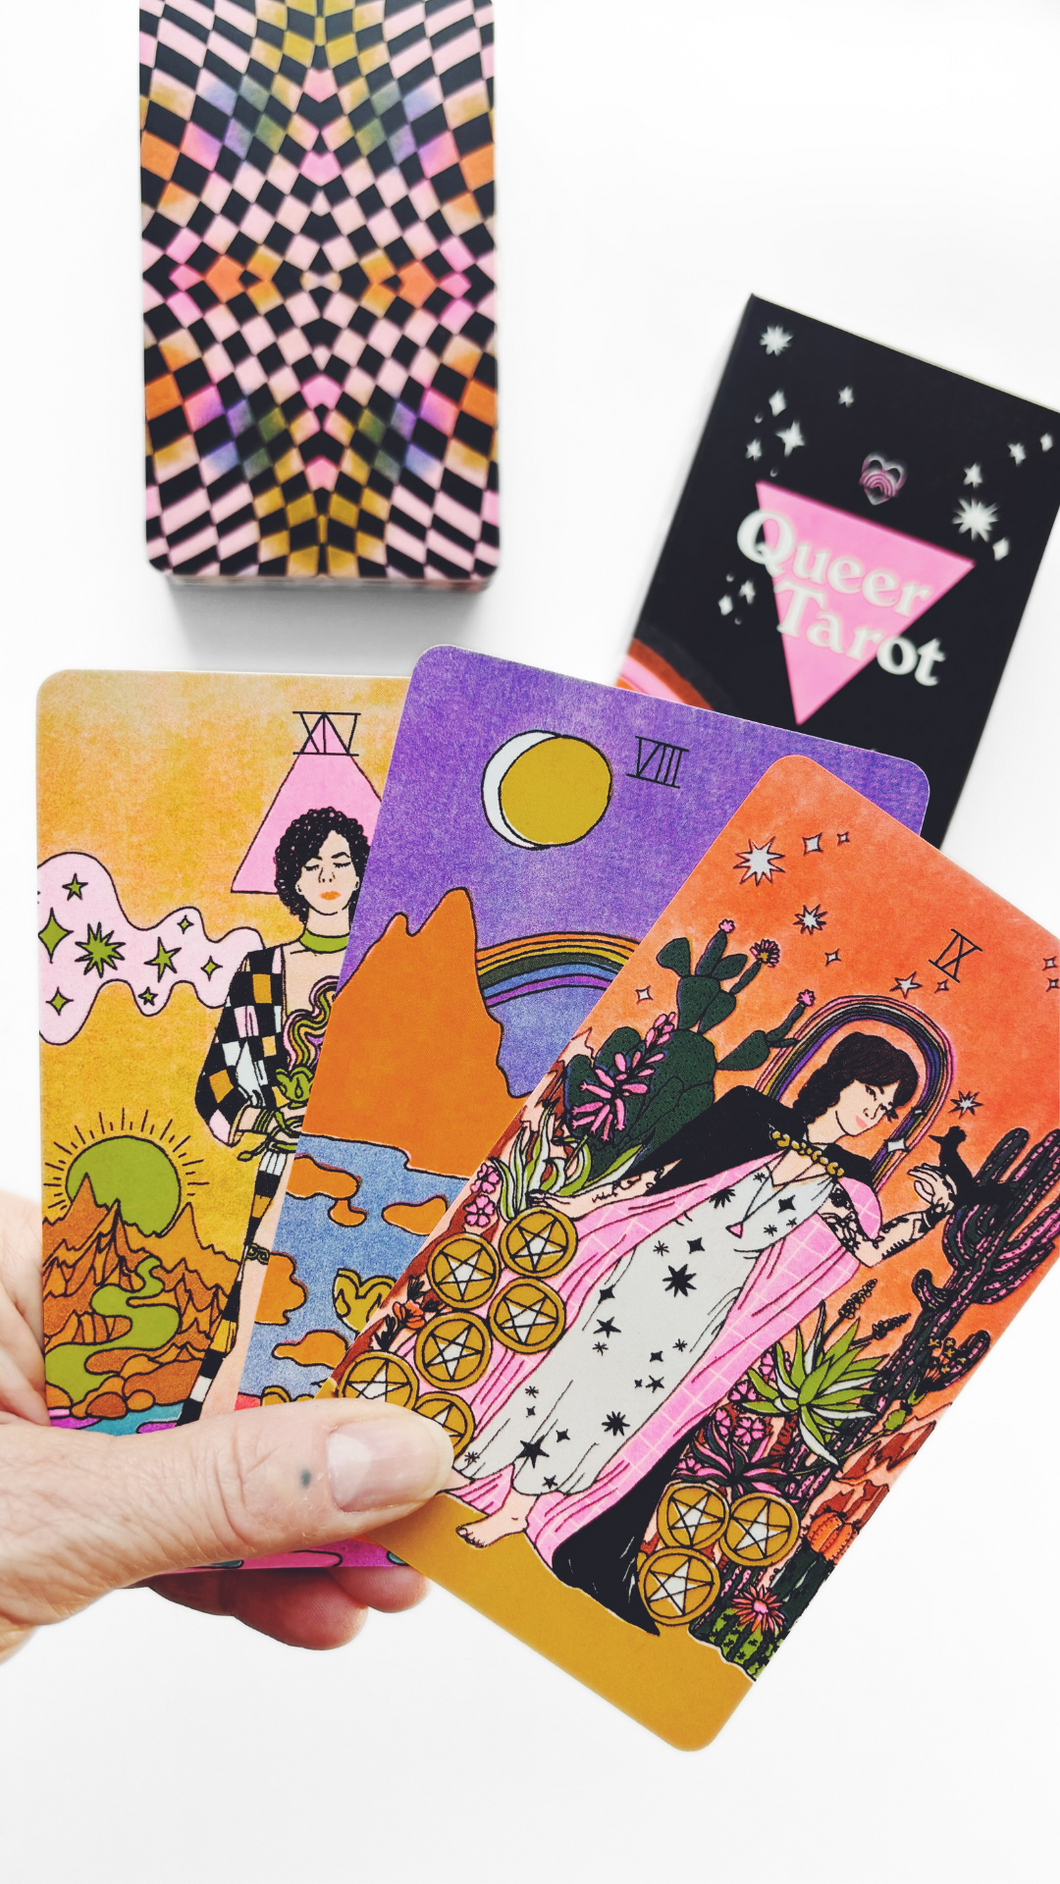 Hand holding three cards from the Queer Tarot